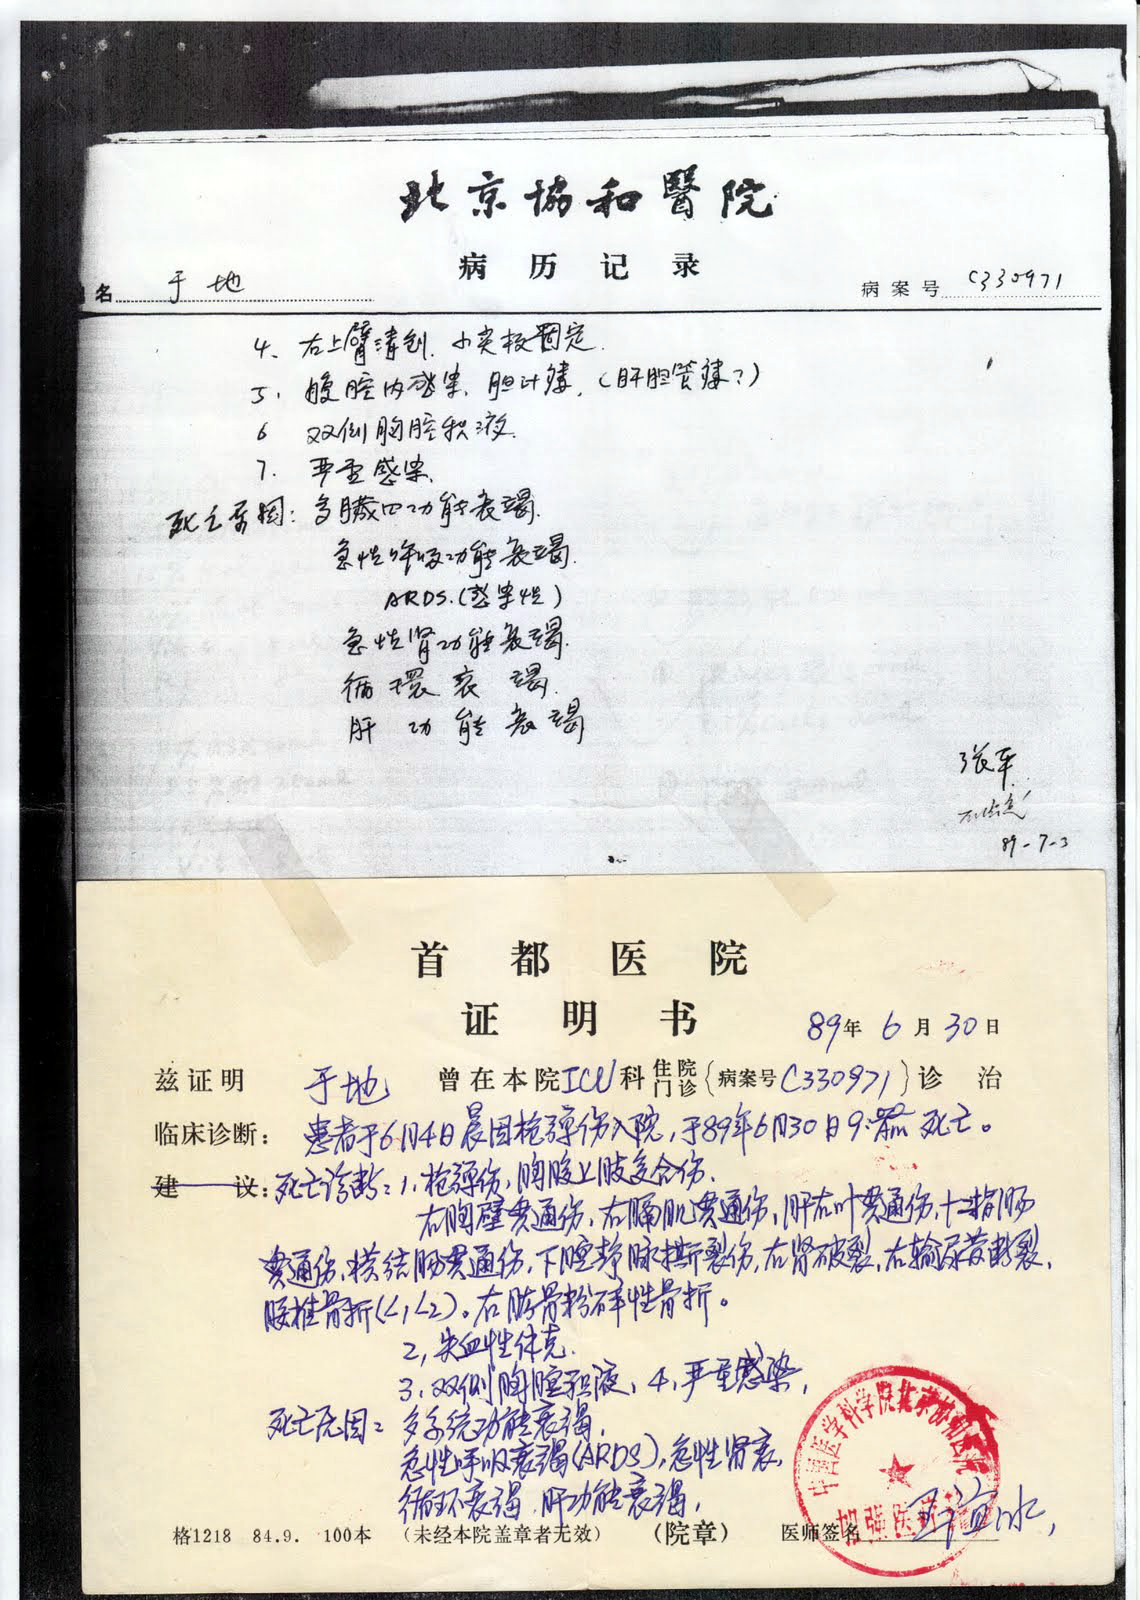 YPhotocopy of (top) part of Yü’s medical records at the Beijing Xiehe Hospital and (bottom) death certificate issued by the Capital Hospital stating the cause of death as multiple organ failure, including of the kidney and liver, and acute respiratory distress syndrome (ARDS).